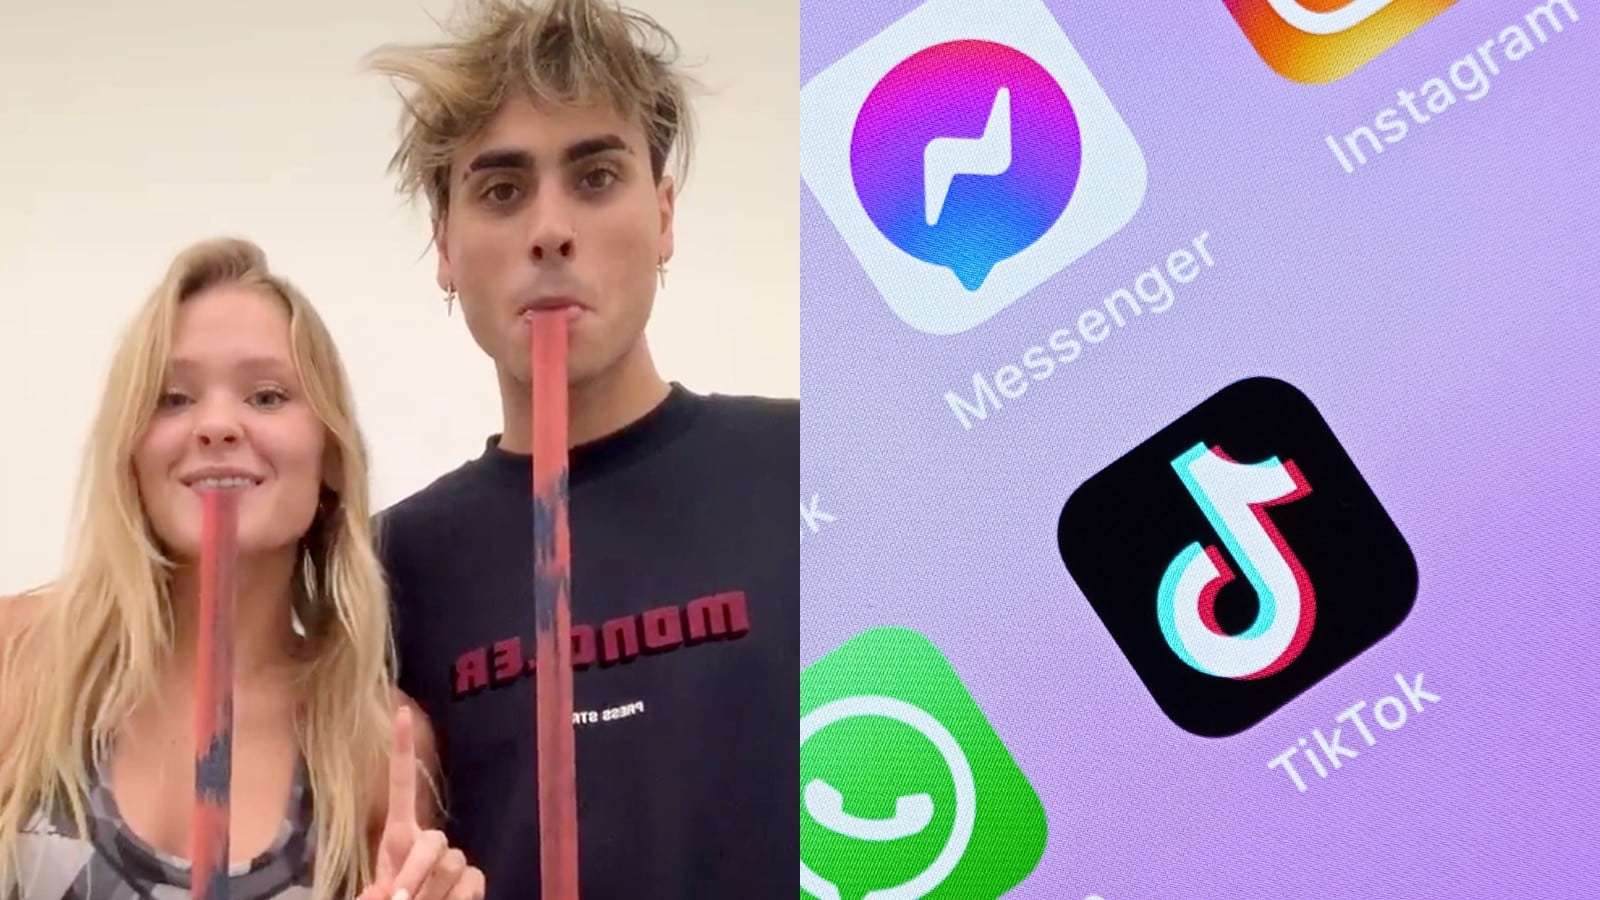 Two TikTokers doing the fruit roll up challenge next to the TikTok logo